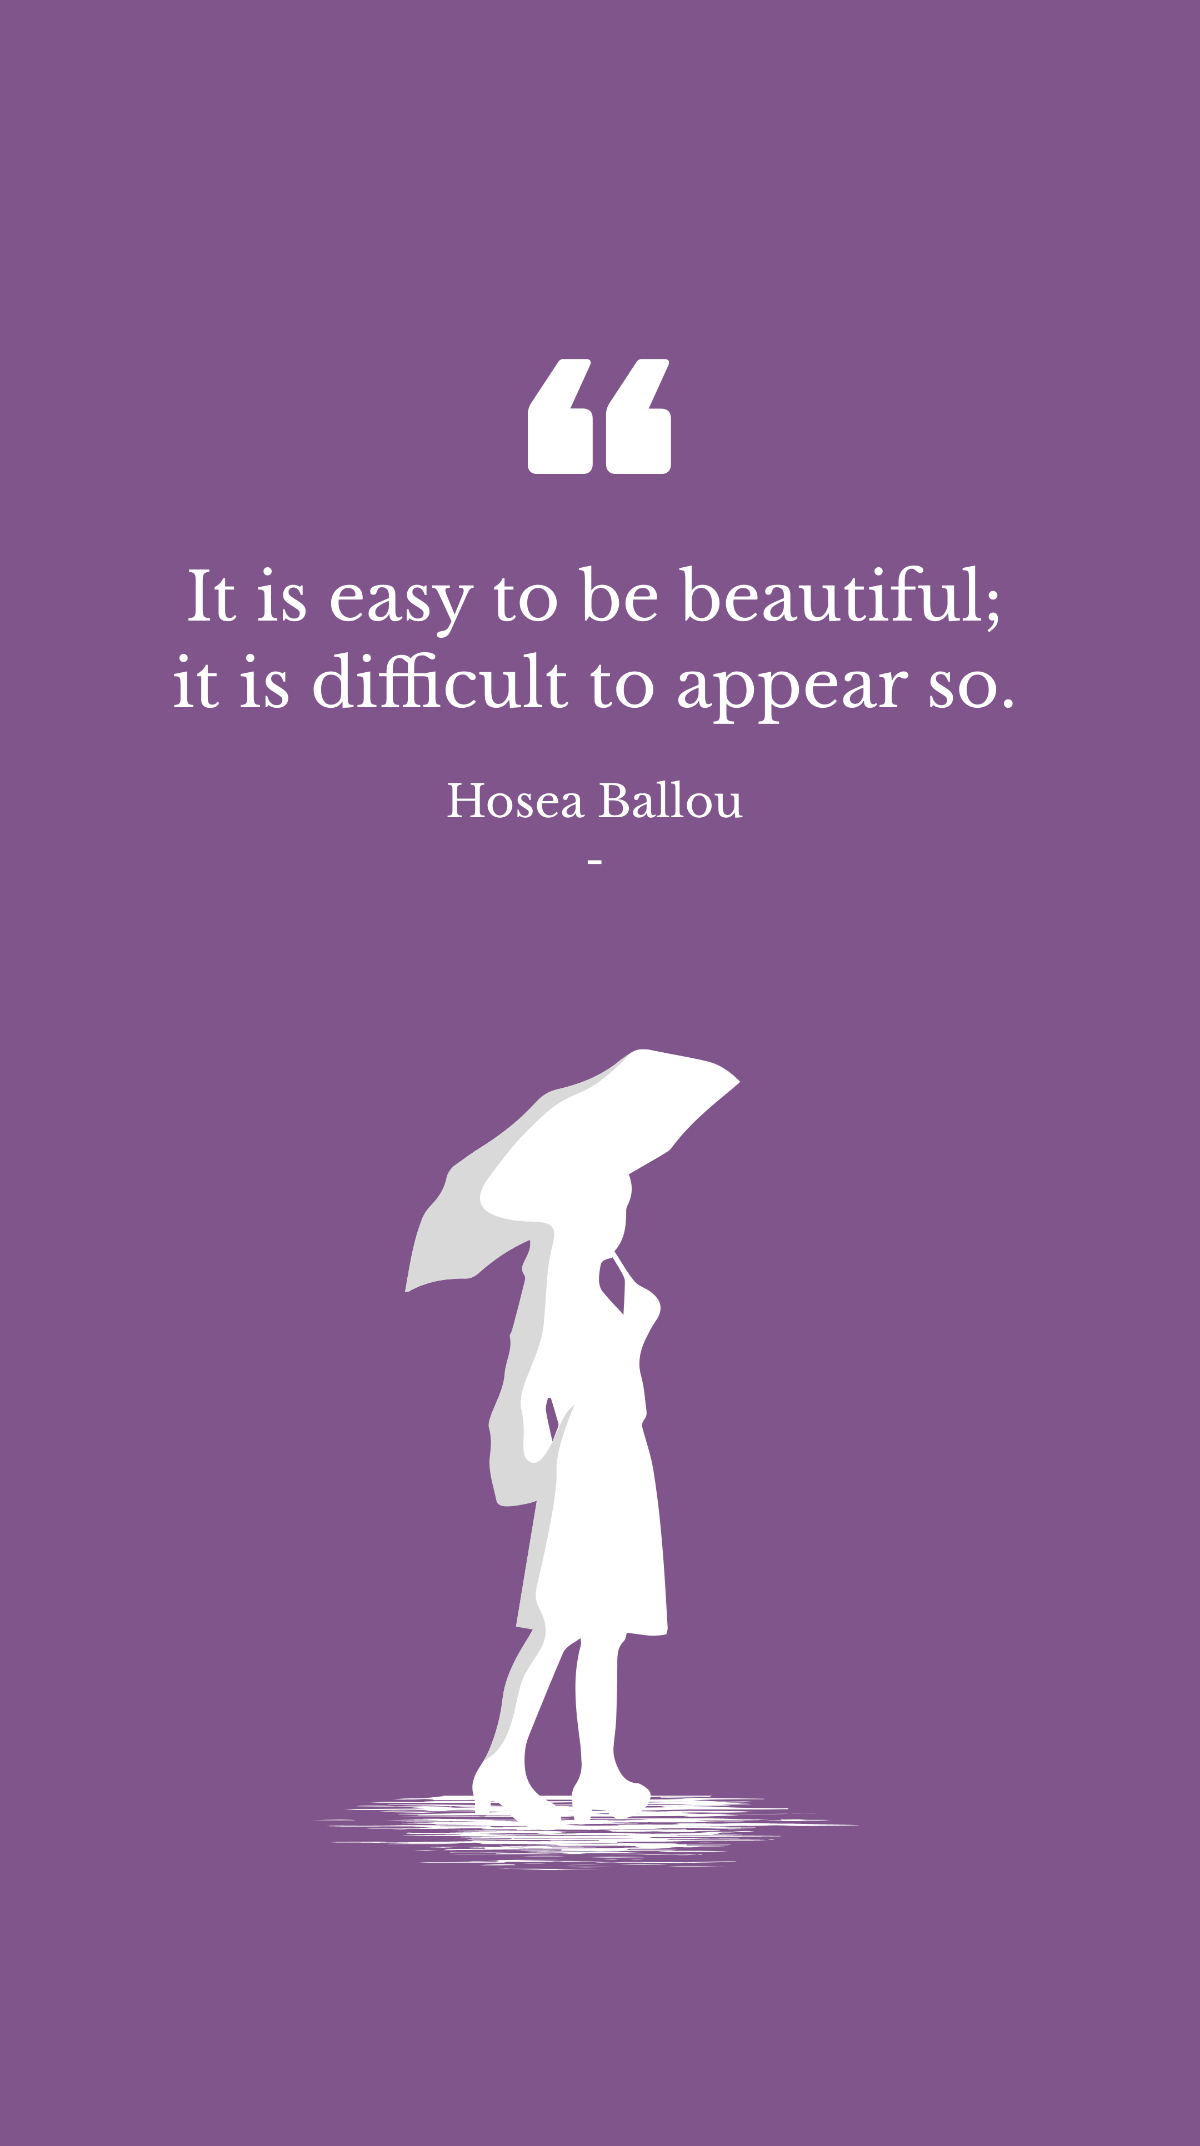 Hosea Ballou - It is easy to be beautiful; it is difficult to appear so.